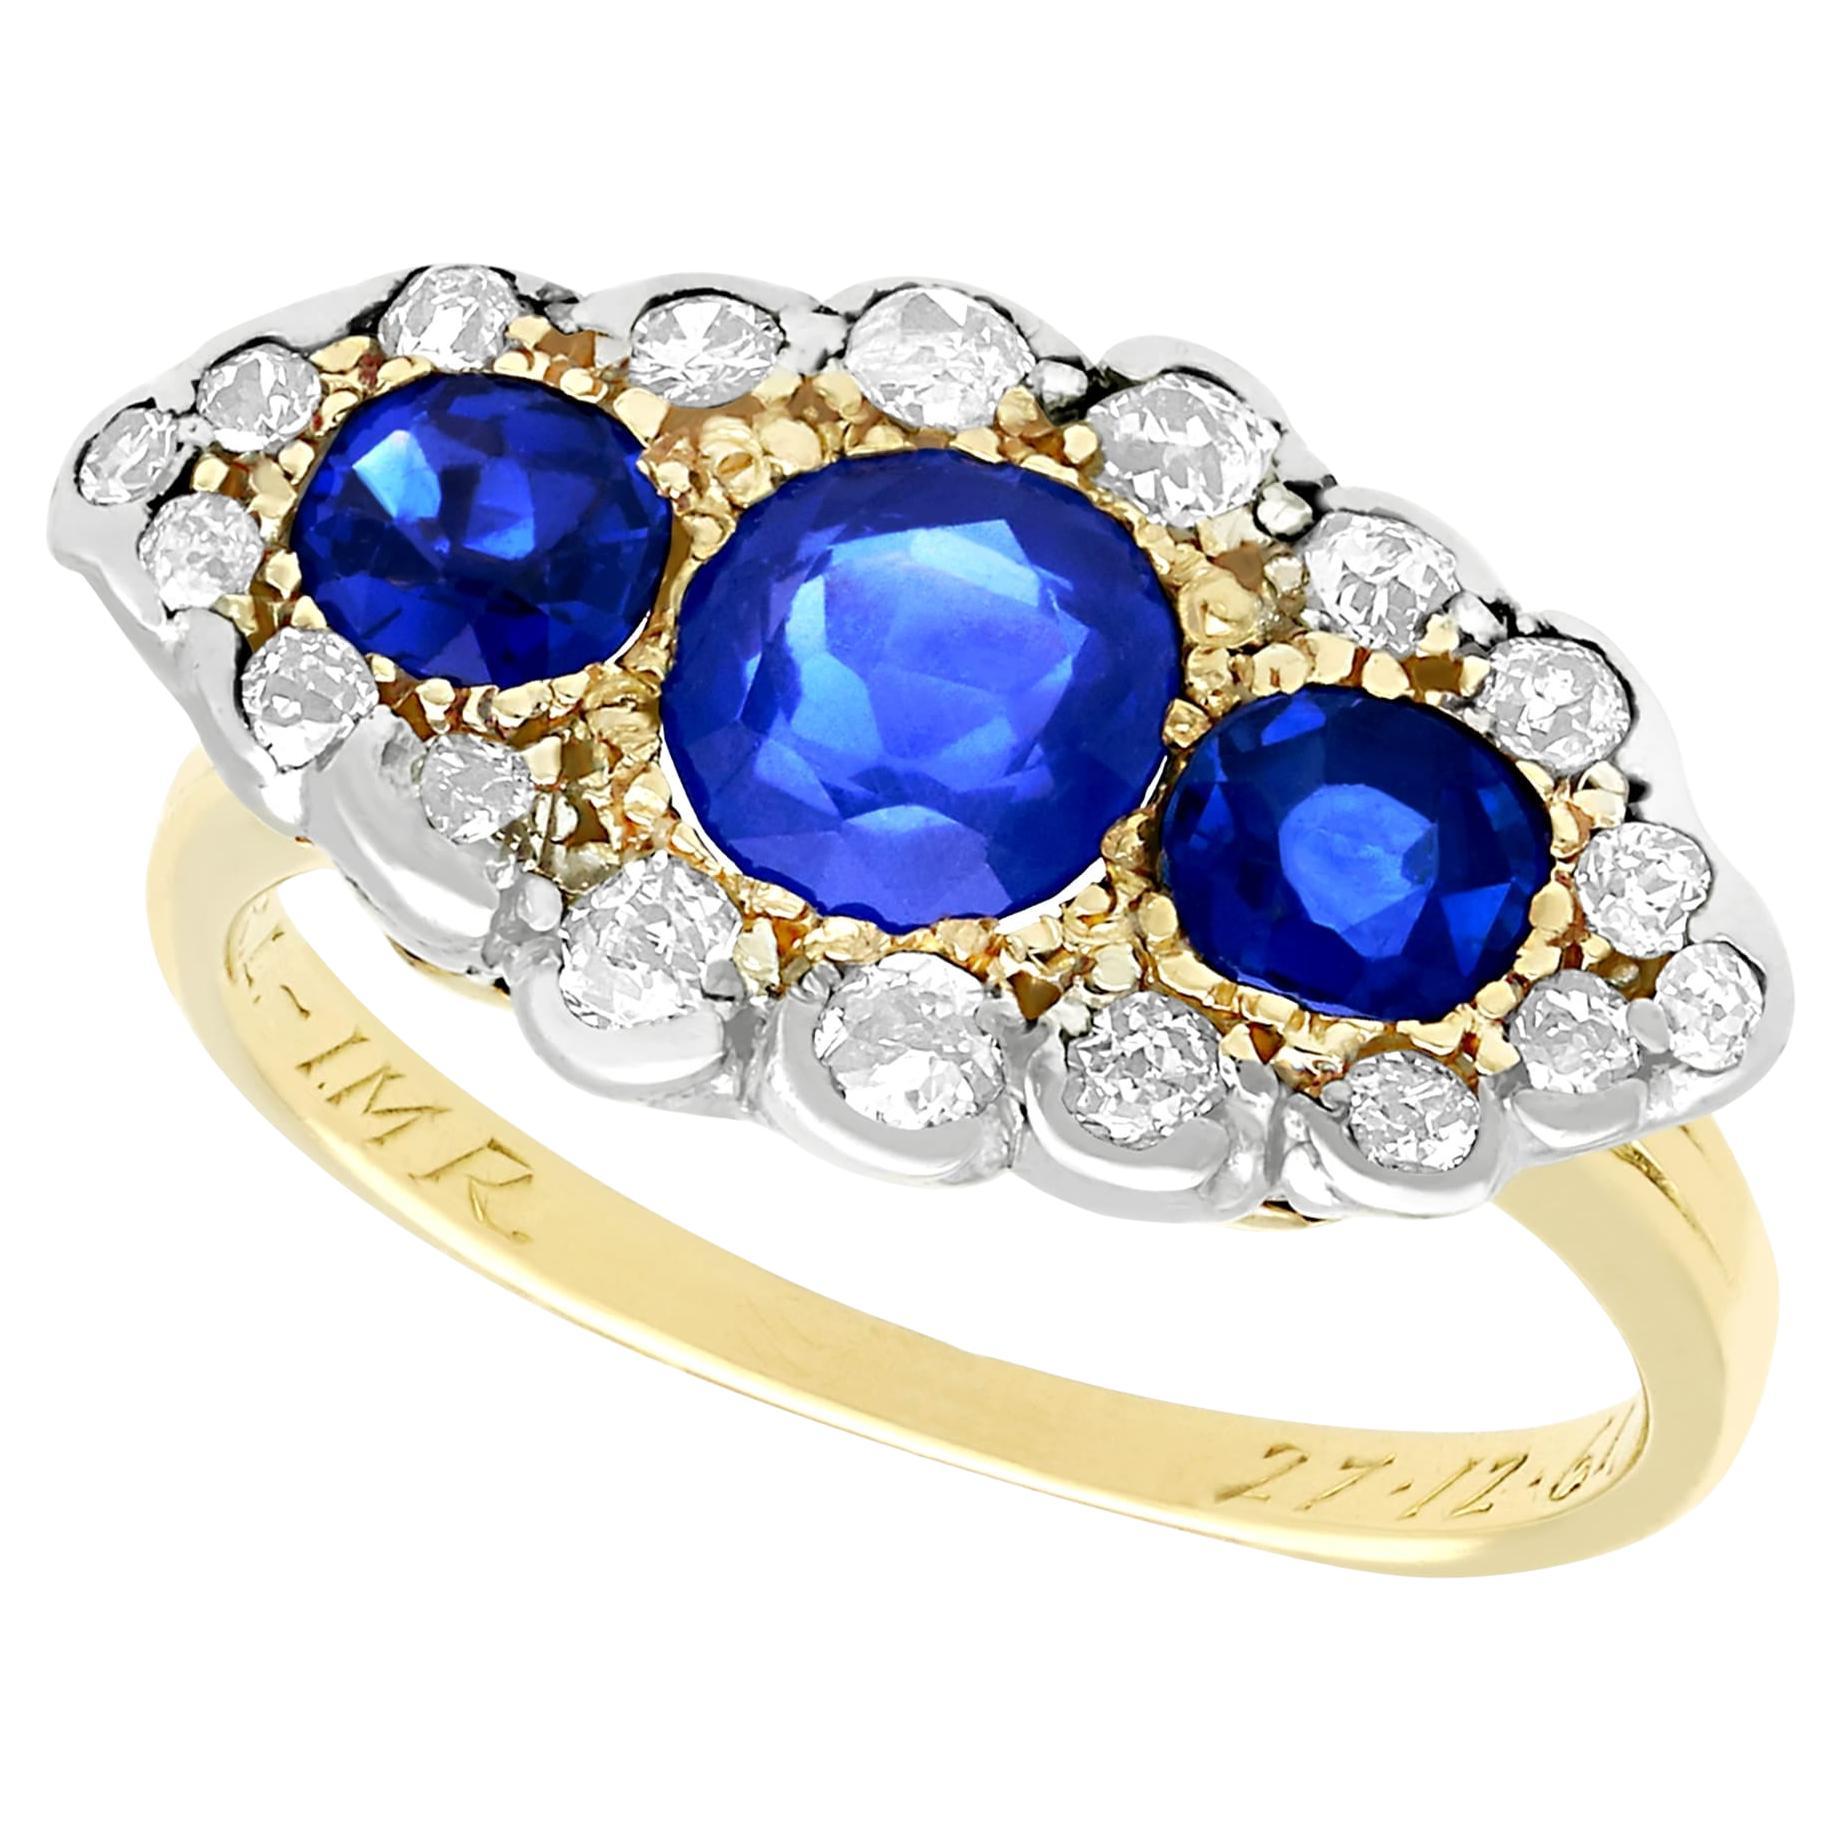 Antique 1.48 Carat Sapphire 1.04 Carat Diamond Ring in Yellow Gold For Sale